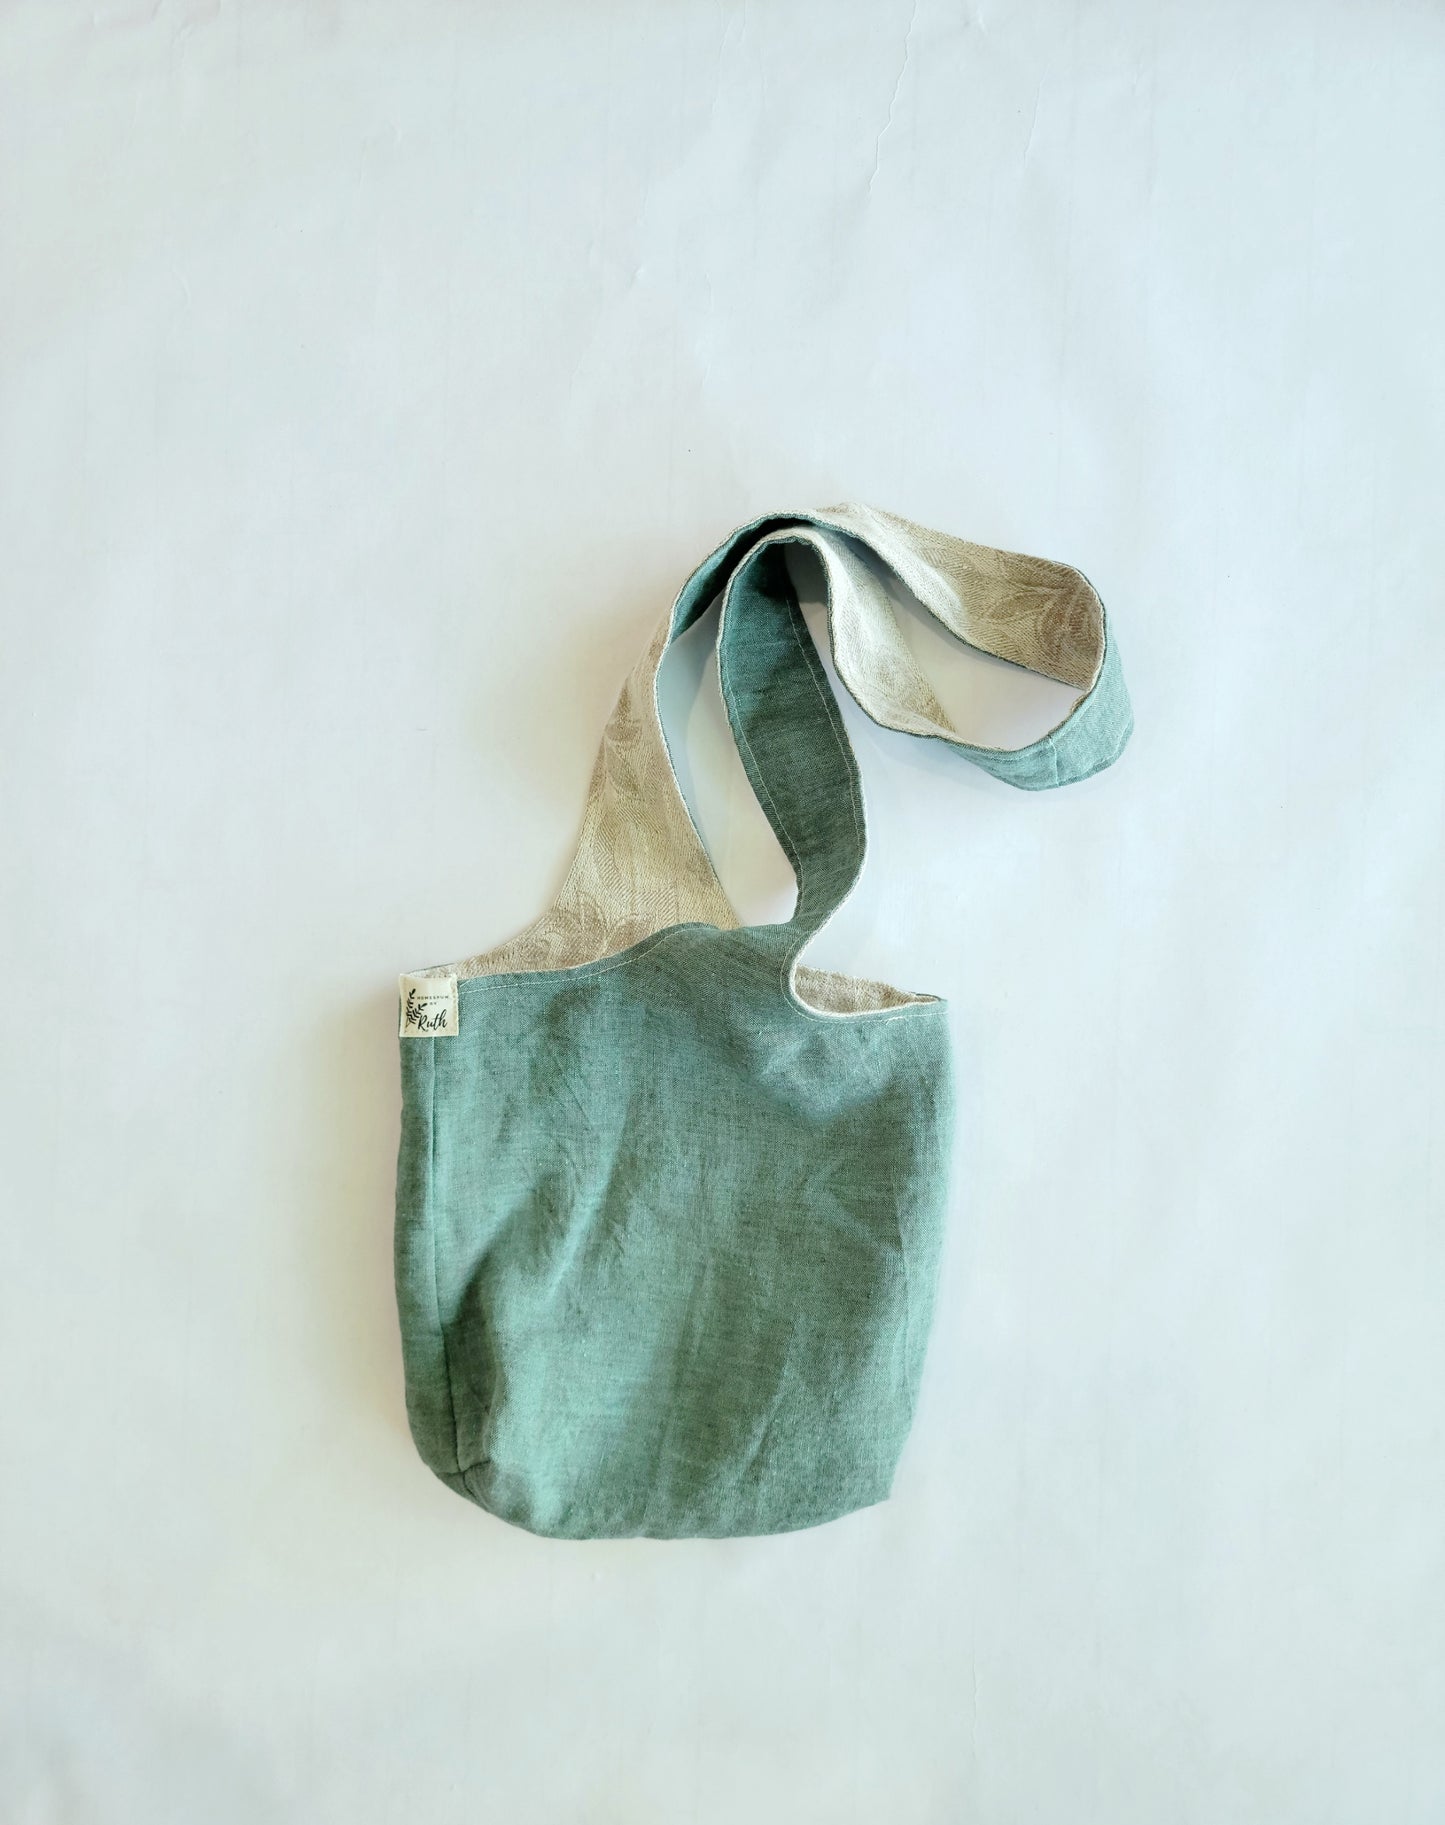 OOAK Linen Foraging Bags - Ready to ship!